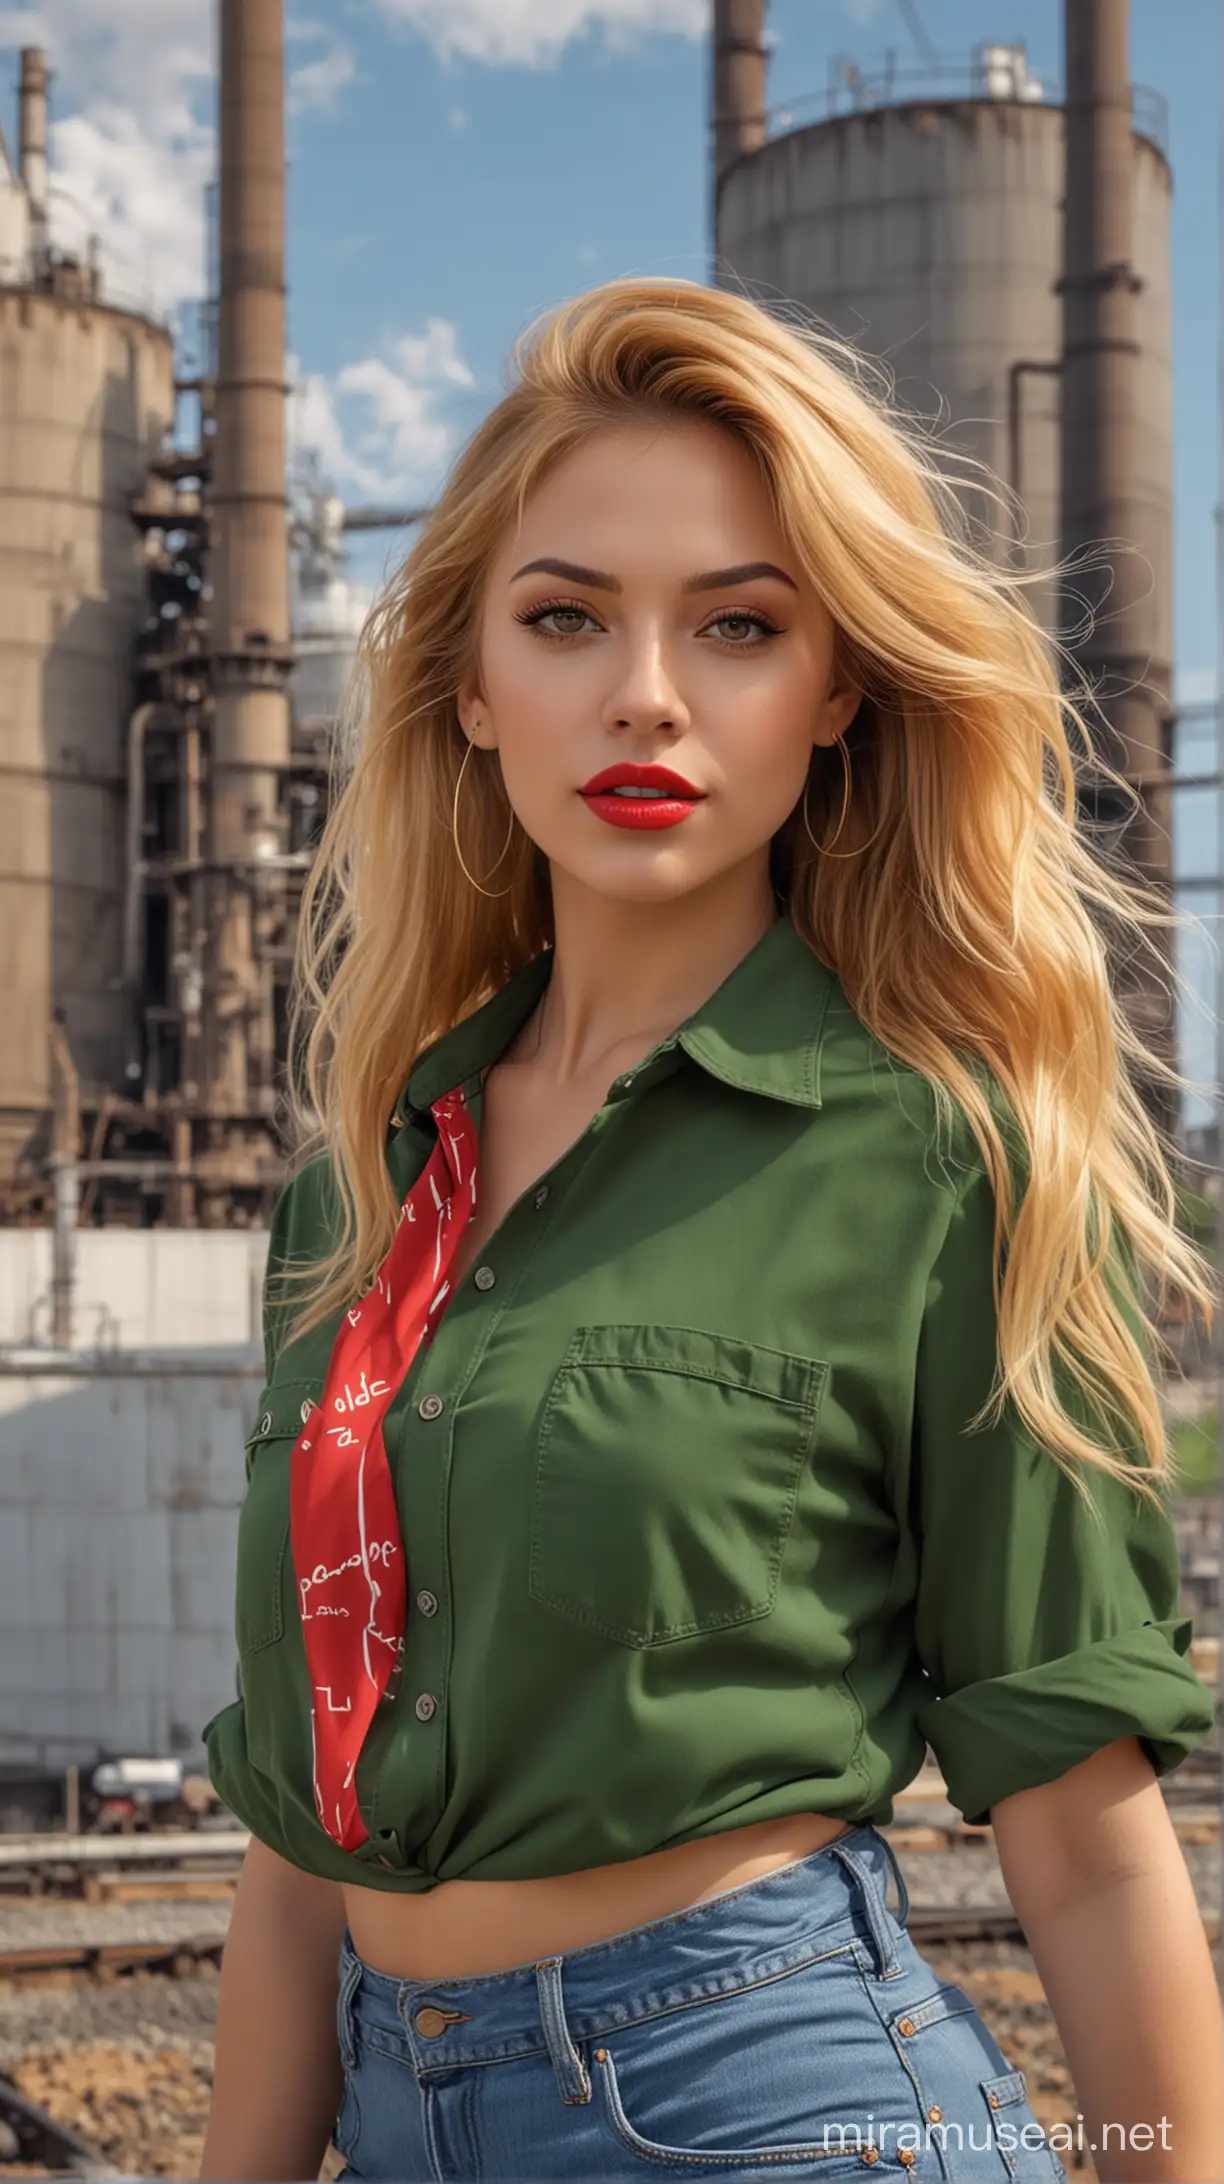 Beautiful USA Girl with Golden Hair and Red Lipstick at Power Plant